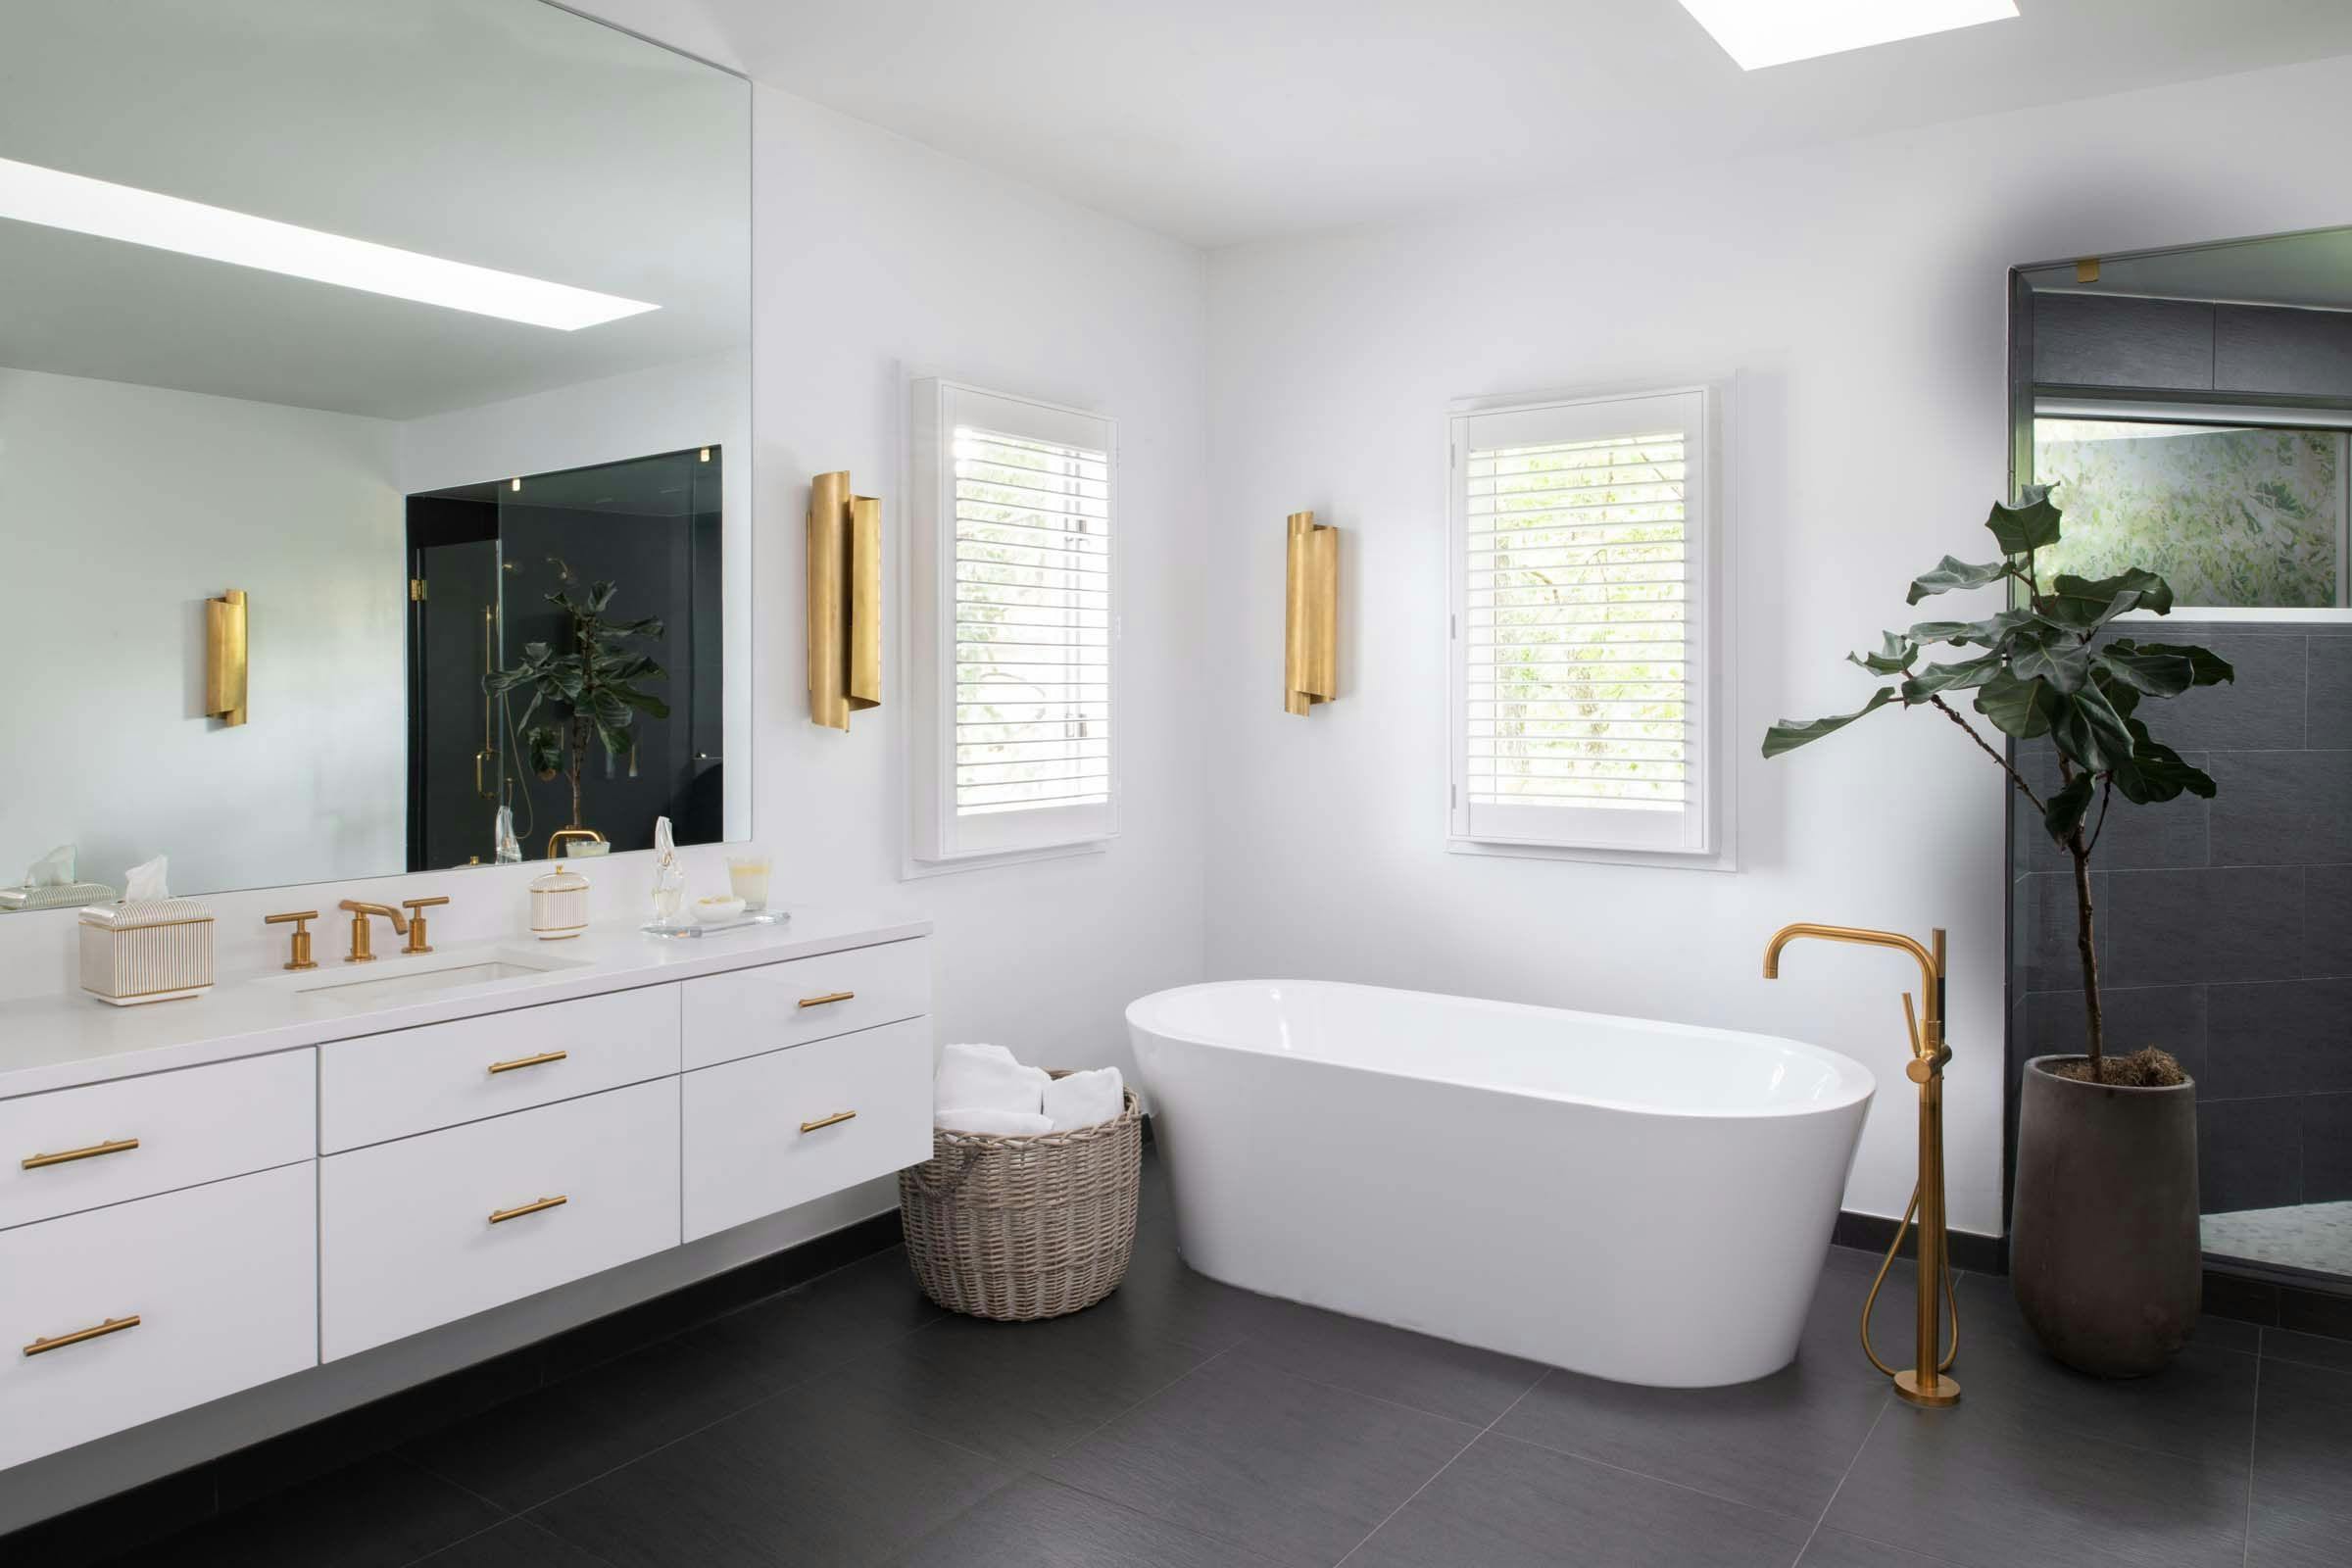 Oaklyn master bathroom with clawfoot tub and golden accents